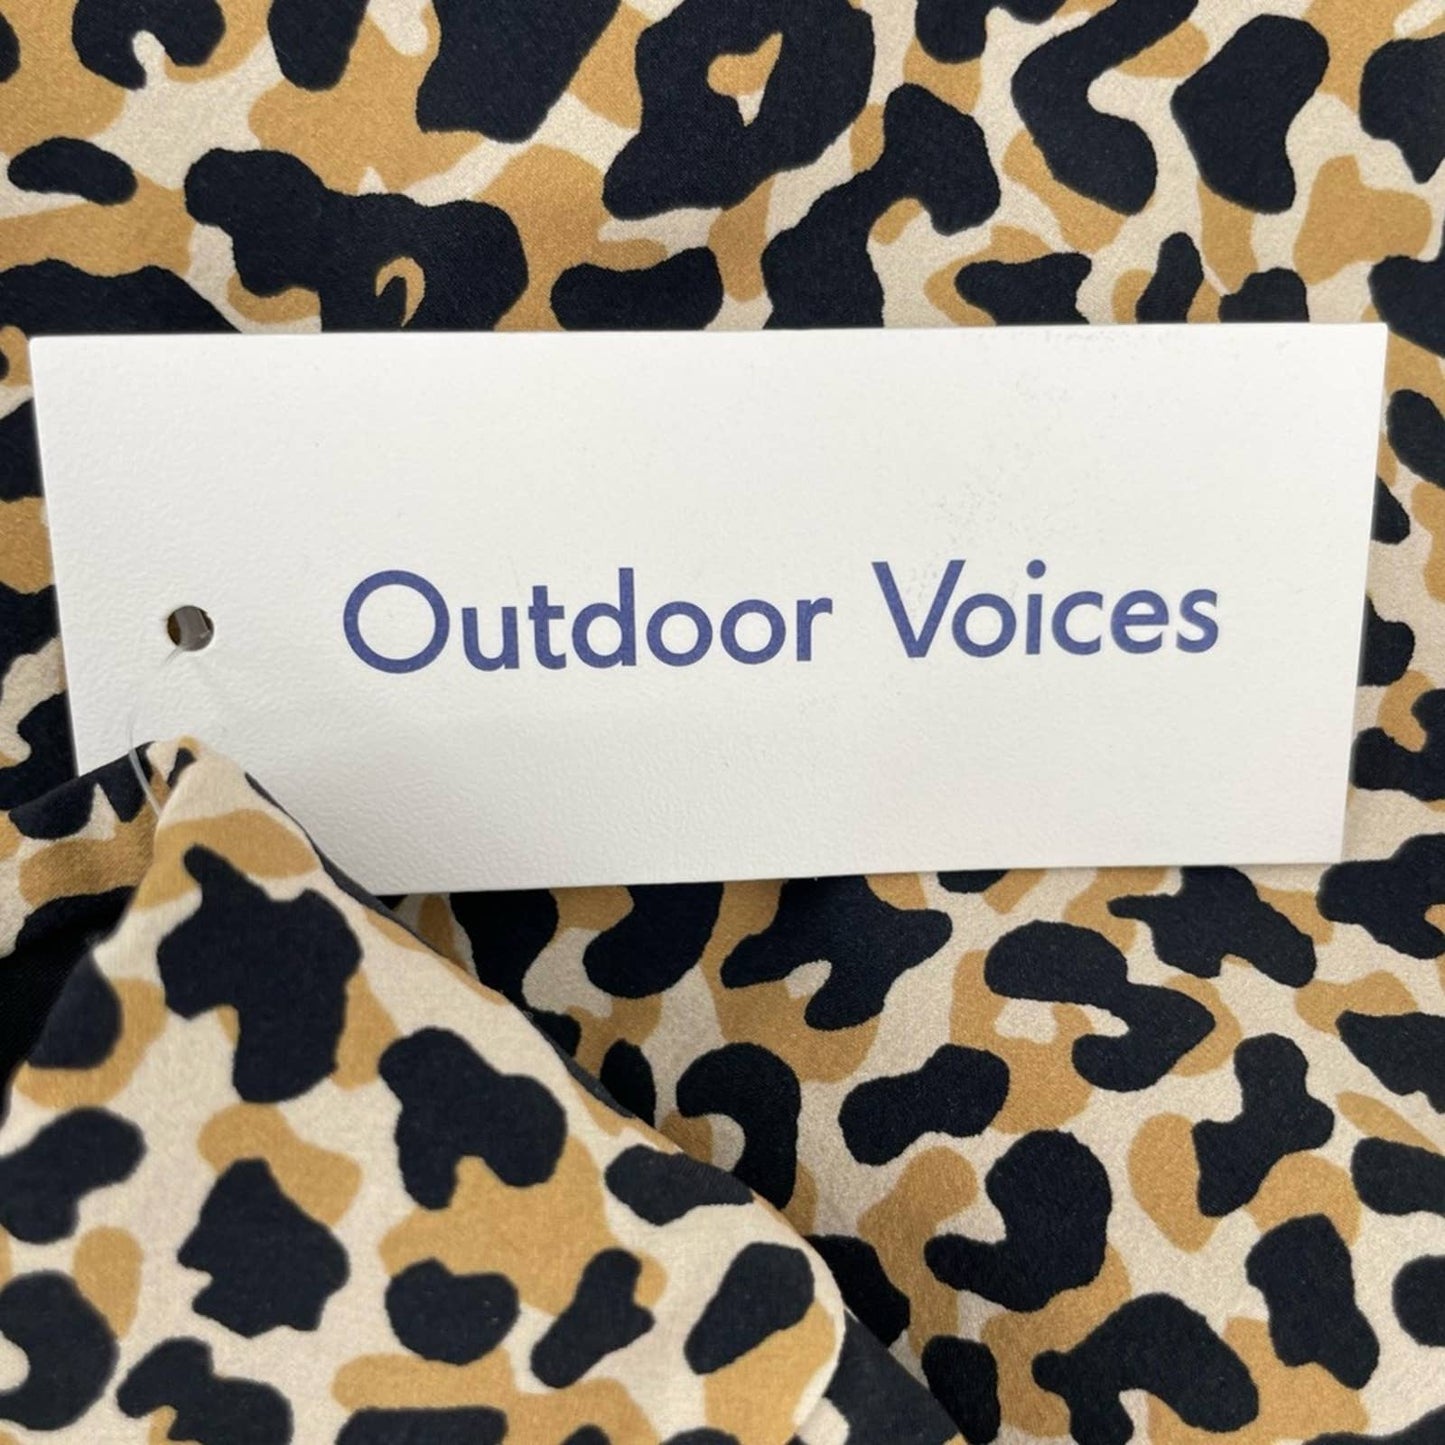 NEW Outdoor Voices Exercise Skort Leopard Print Black Active Athletic Skirt Size XS